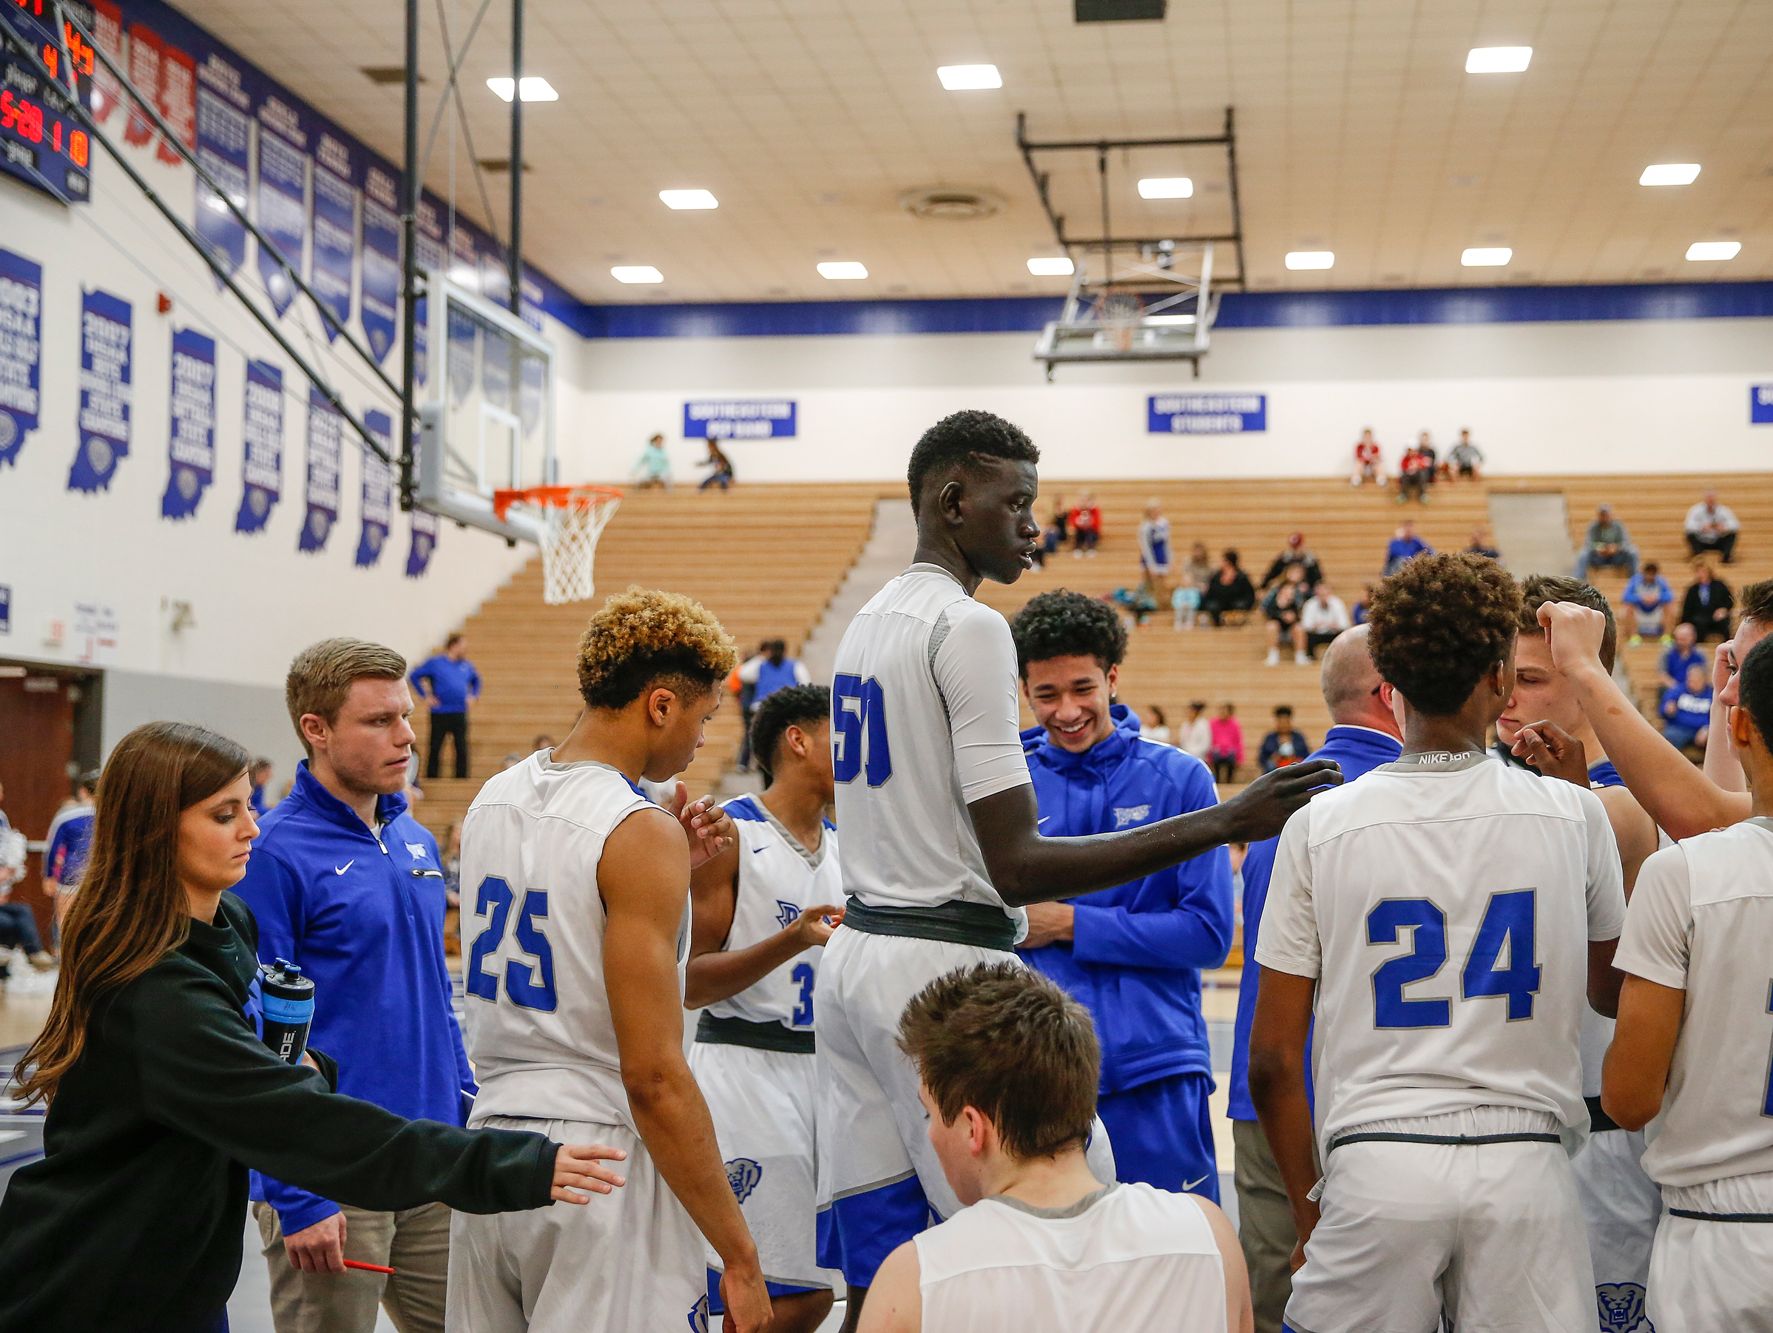 Hamilton Southeastern Royals center Mabor Majak (50), middle, breaks the huddle to start the second half in the game against the New Castle Trojans on Tuesday, Feb. 7, 2017.